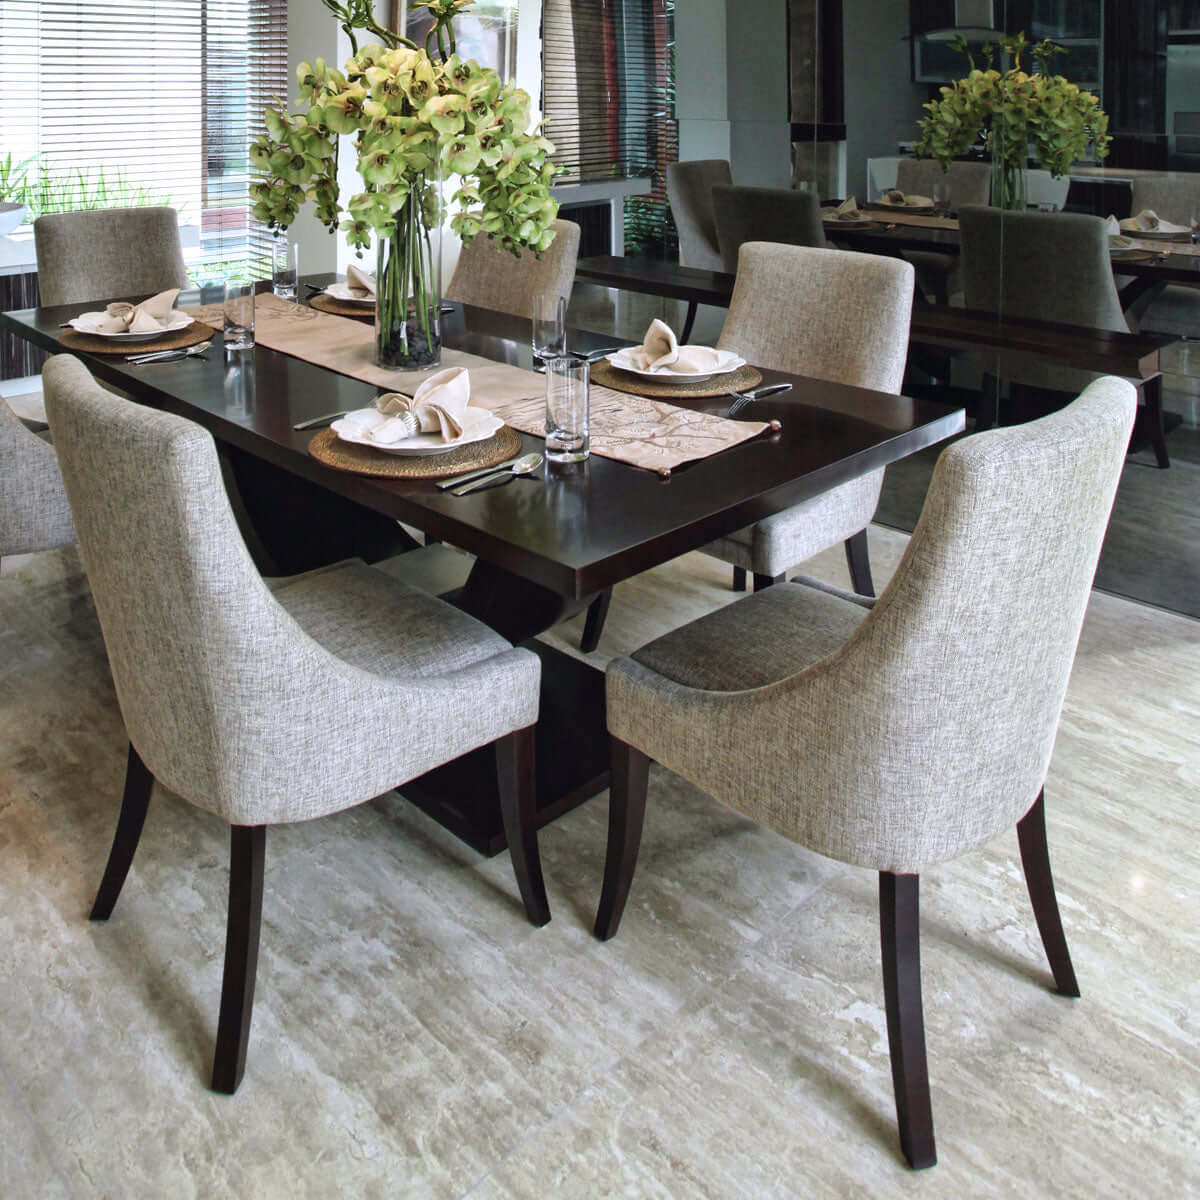 dining room table and chairs with wood legs and glossy surface